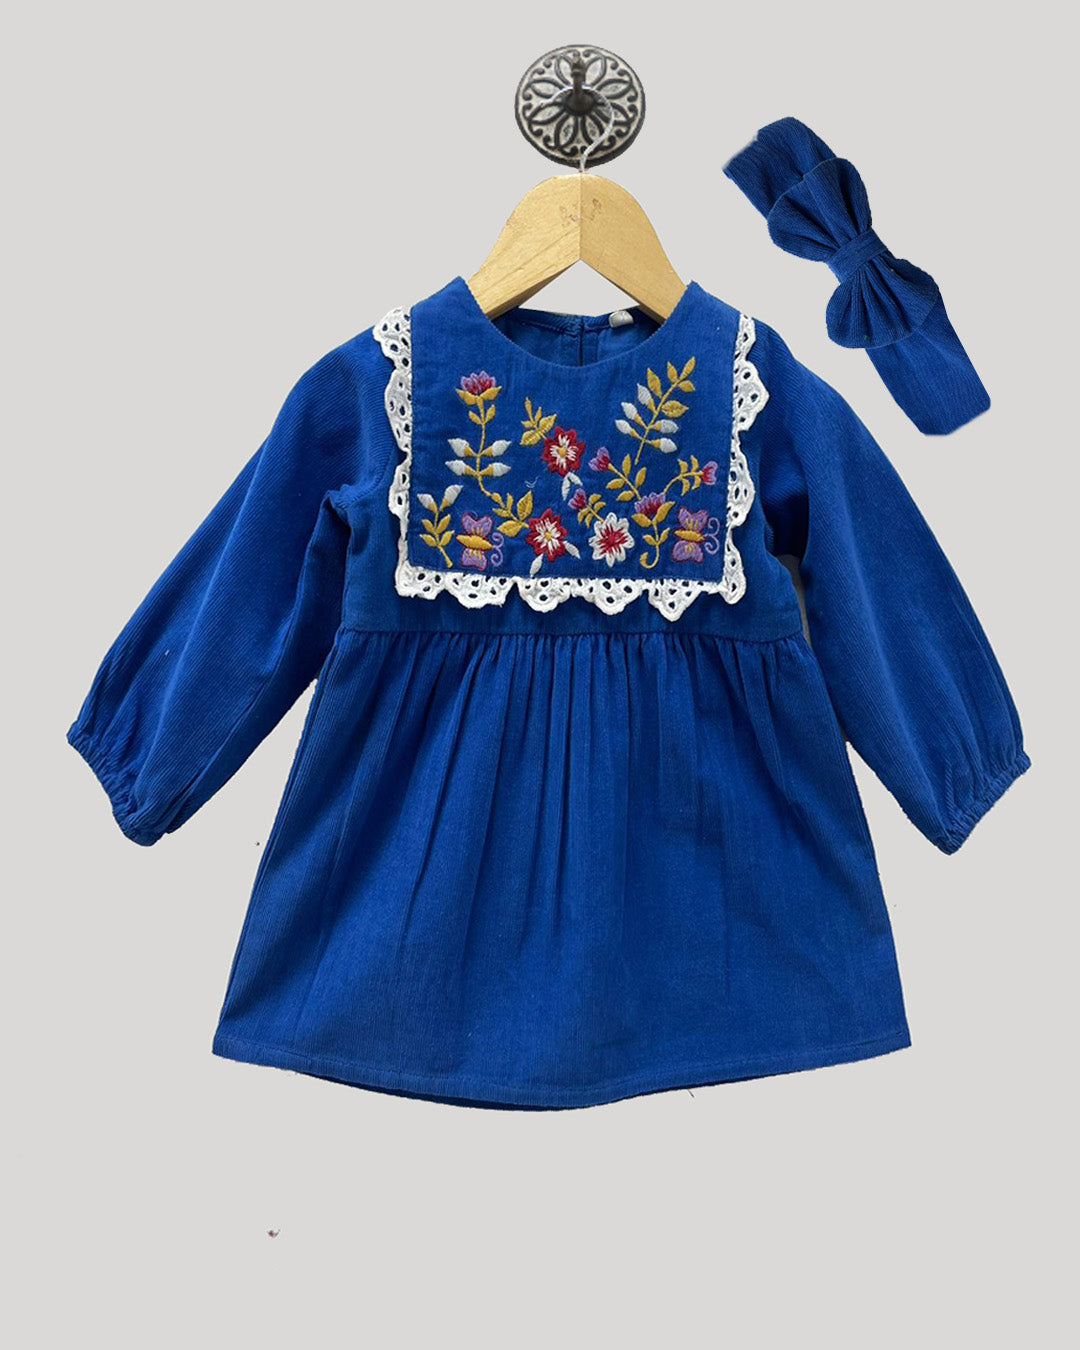 Blue Corduroy Embroidered Dress